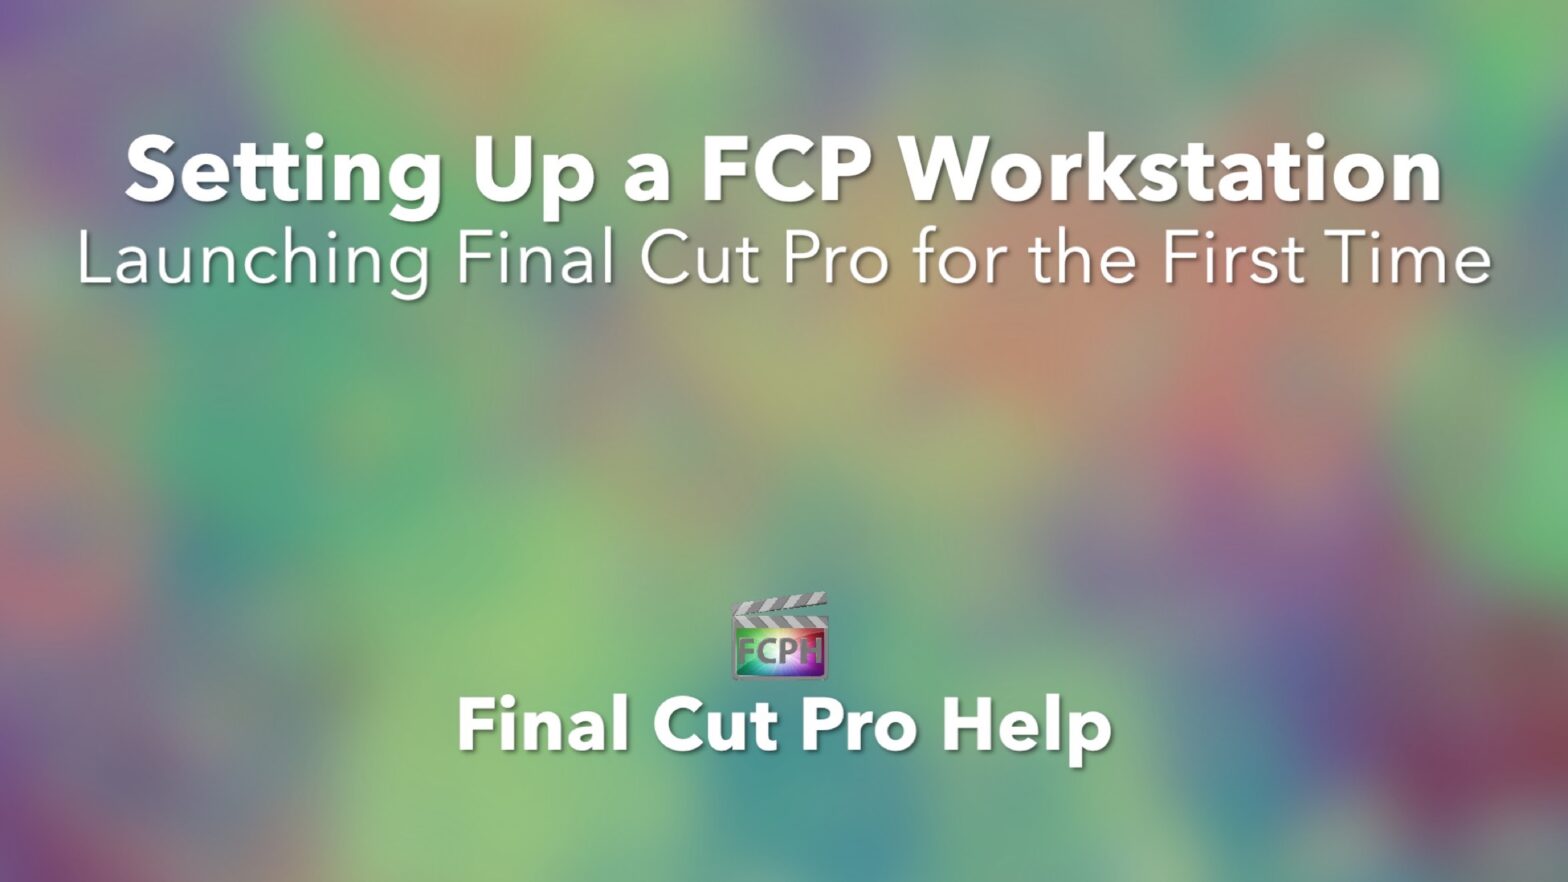 Setting Up a FCP Workstation Launching Final Cut Pro for the First Time